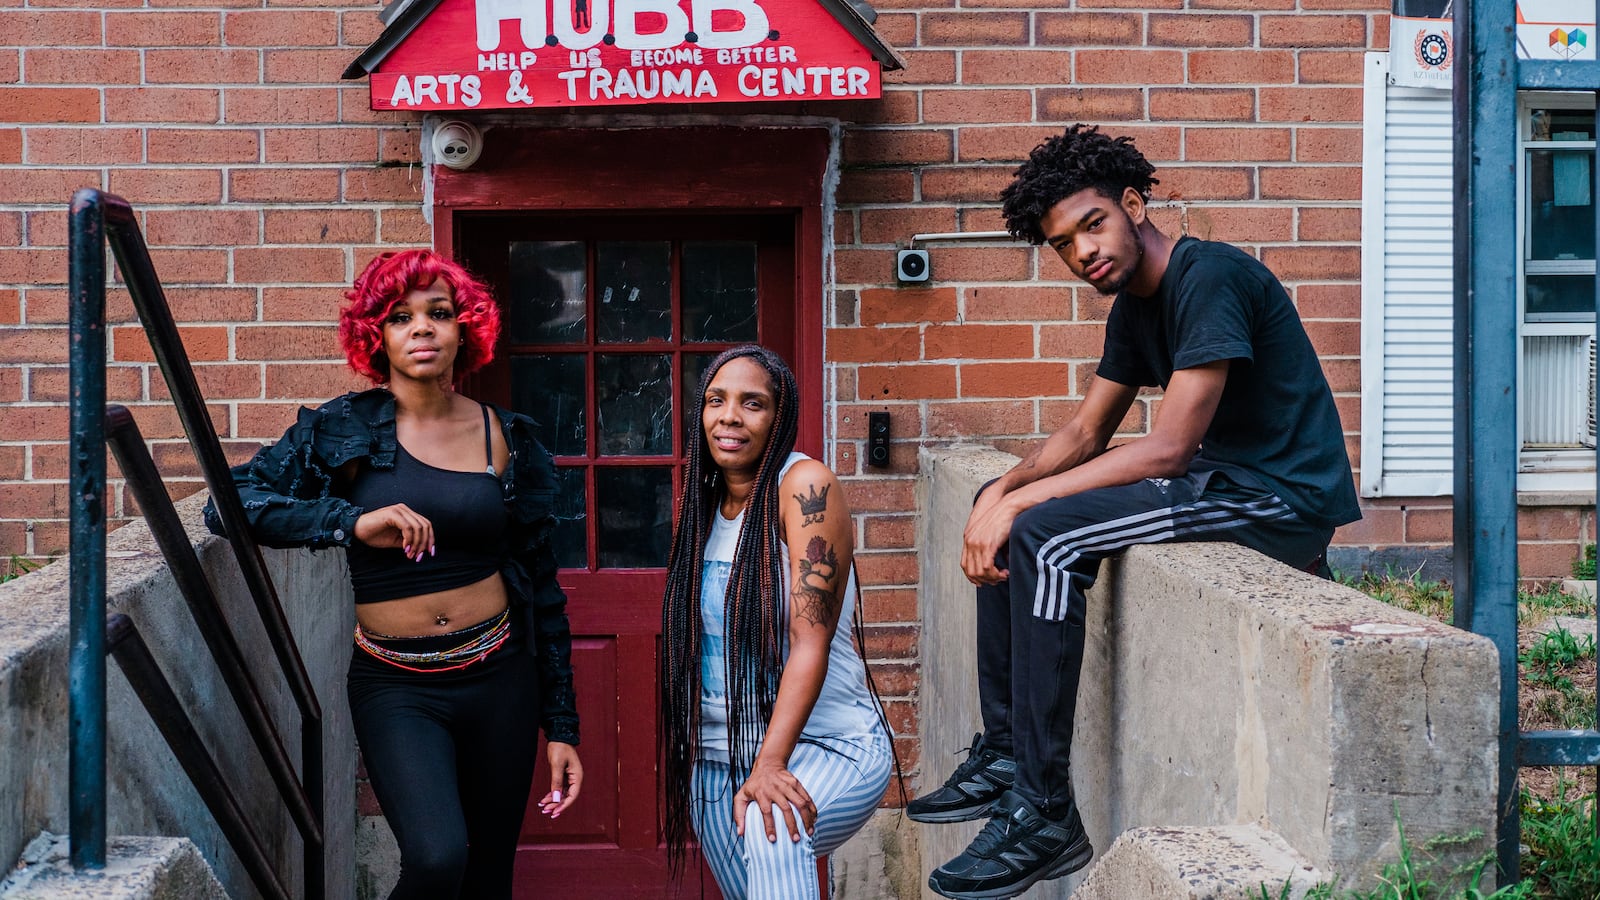 Three people pose in front of the entrance to HUBB on the stairwell of a brick building.